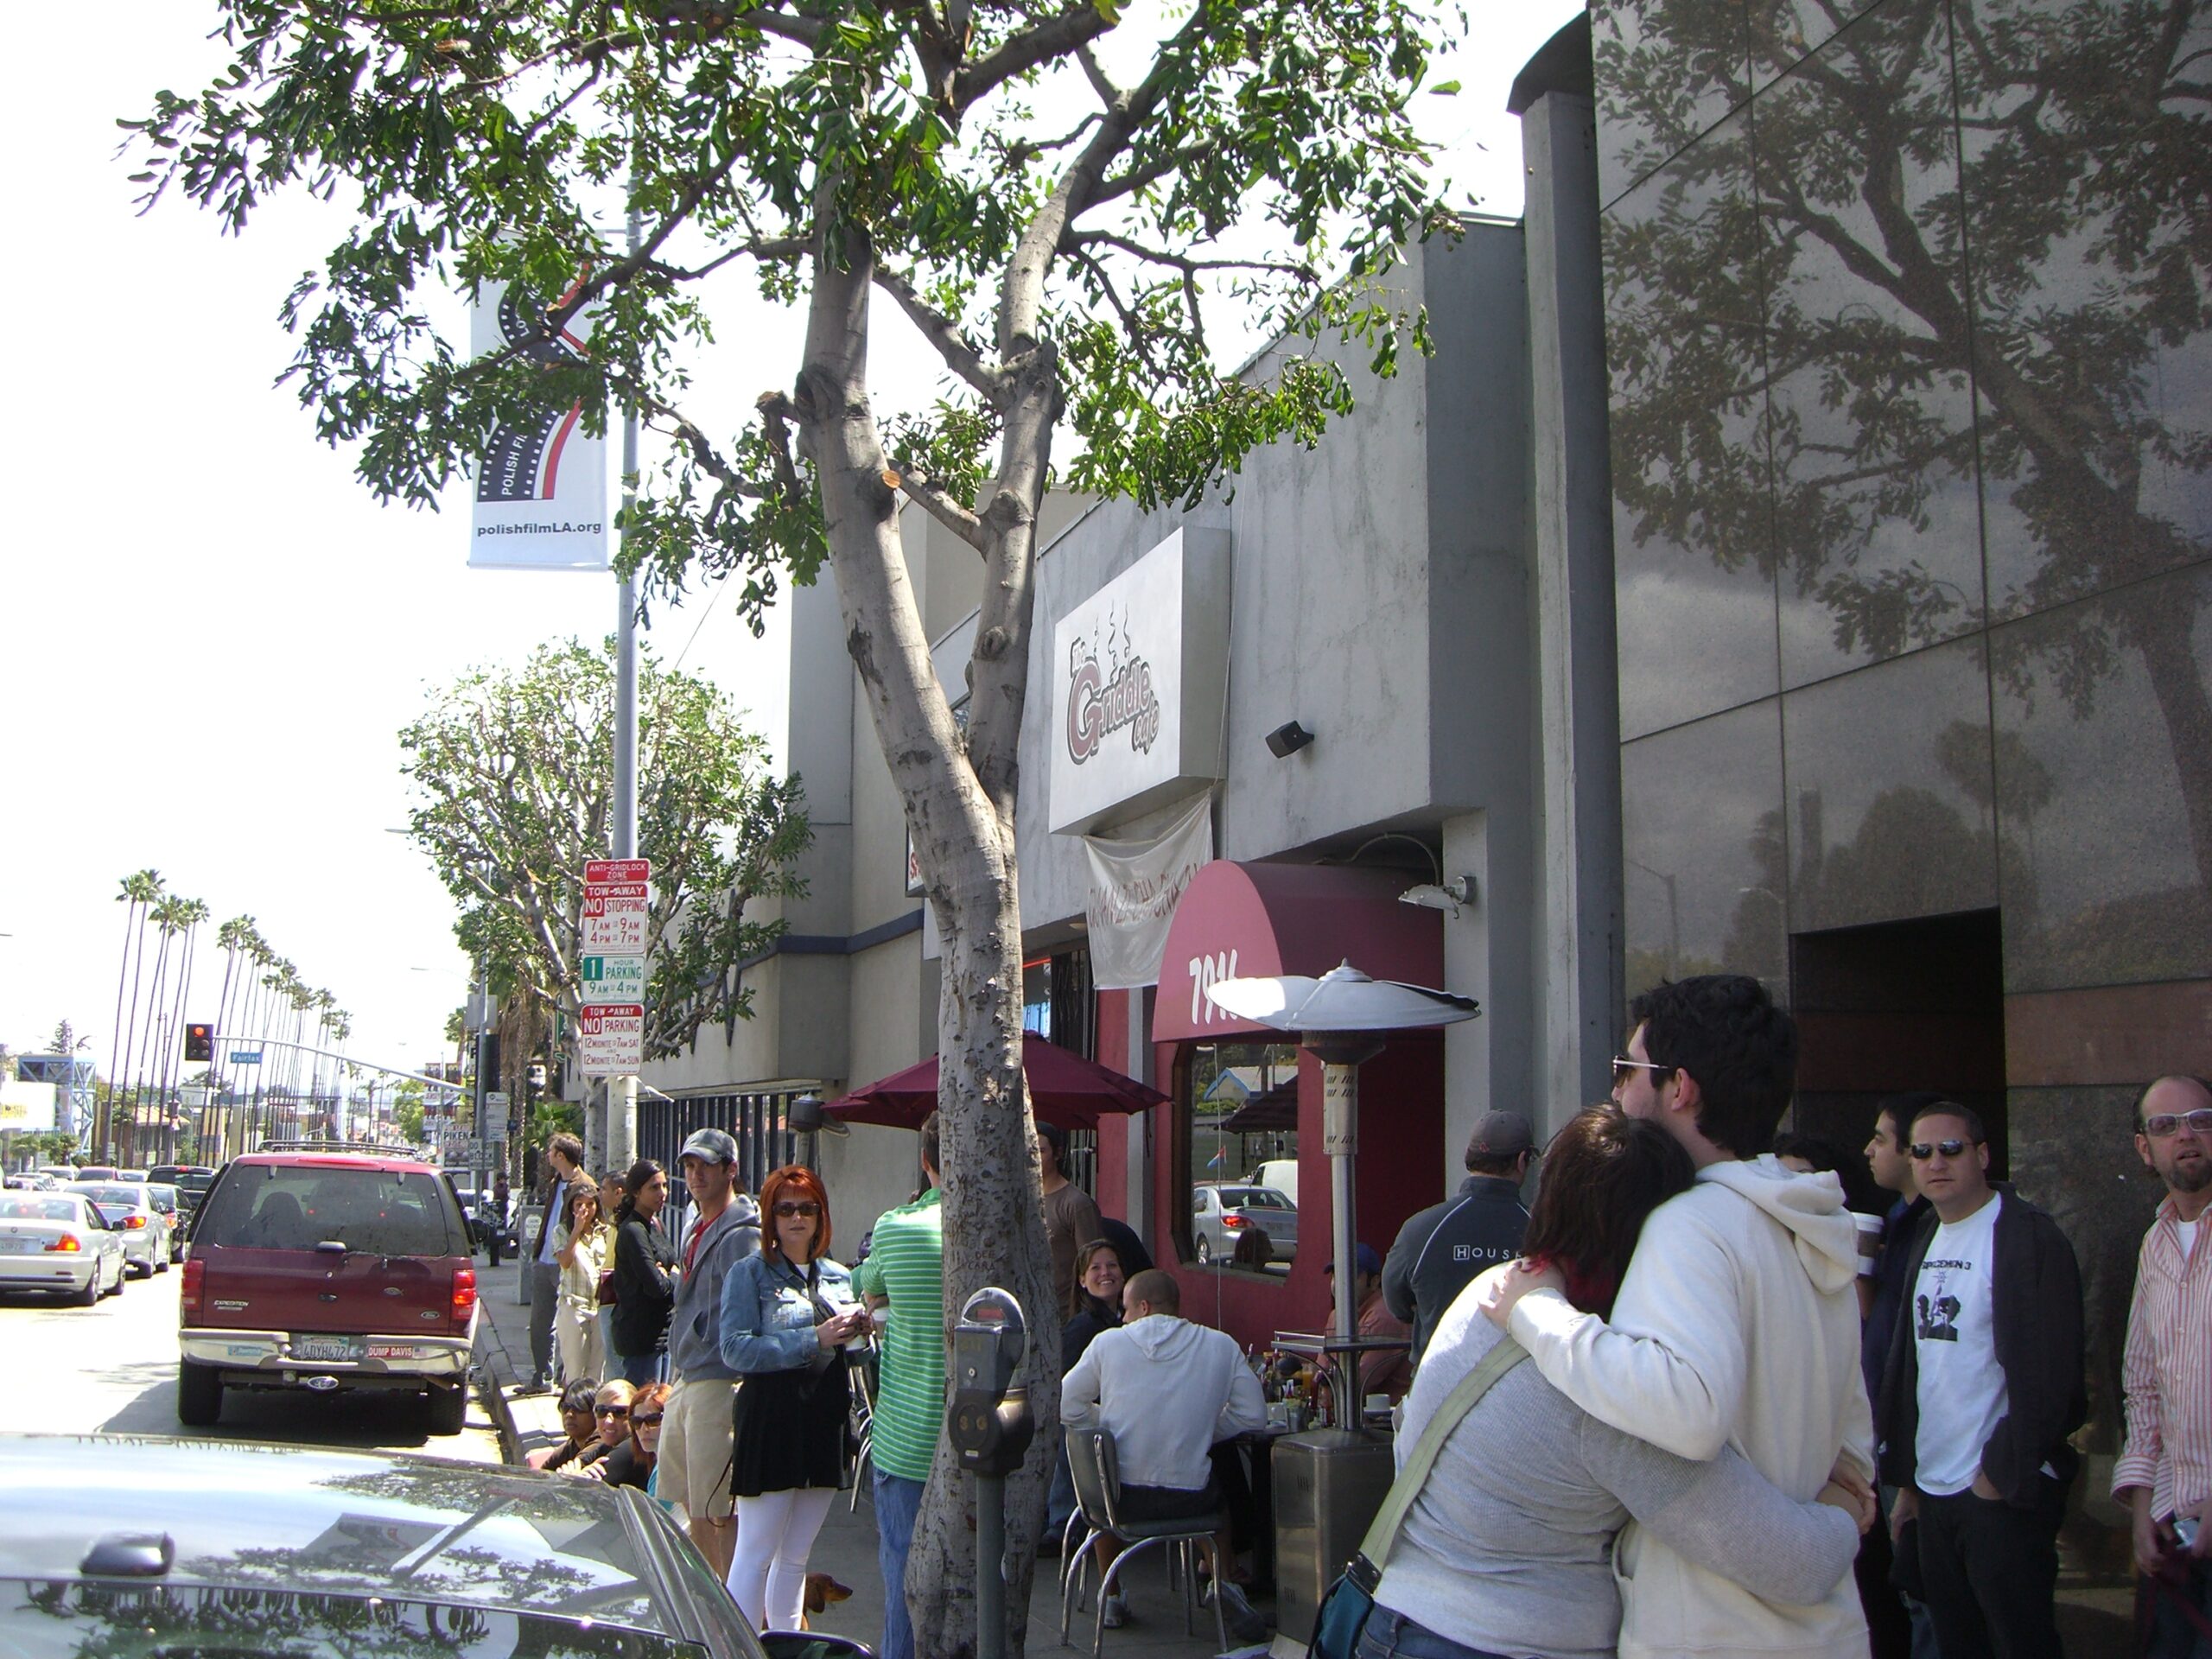 Tens of people wait on a weekend morning to get into The Griddle Cafe in West Hollywood